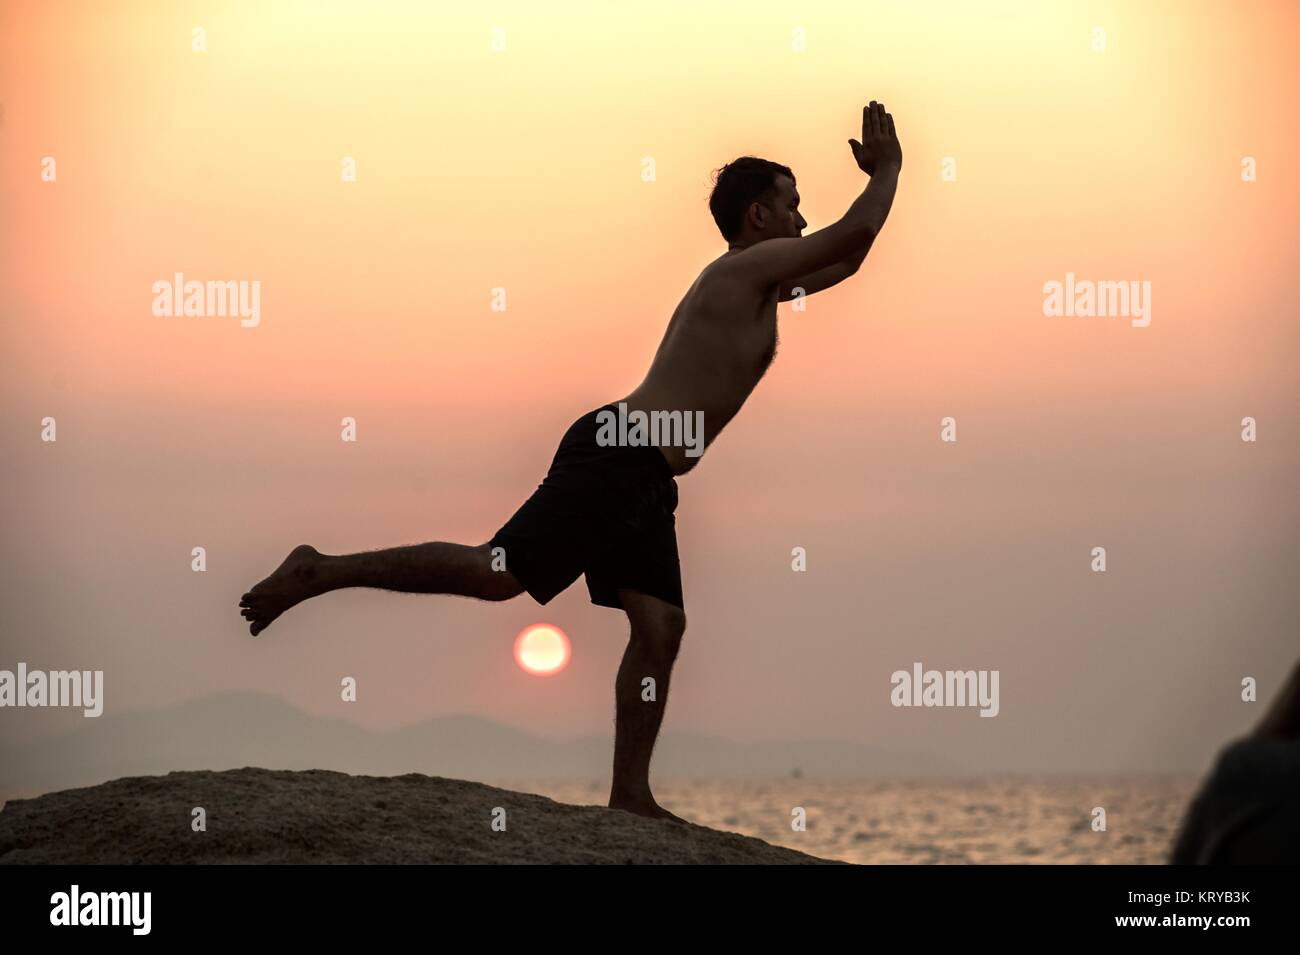 Positive male holding hand up and expressing gladness while standing on stone in Sunset. Stock Photo